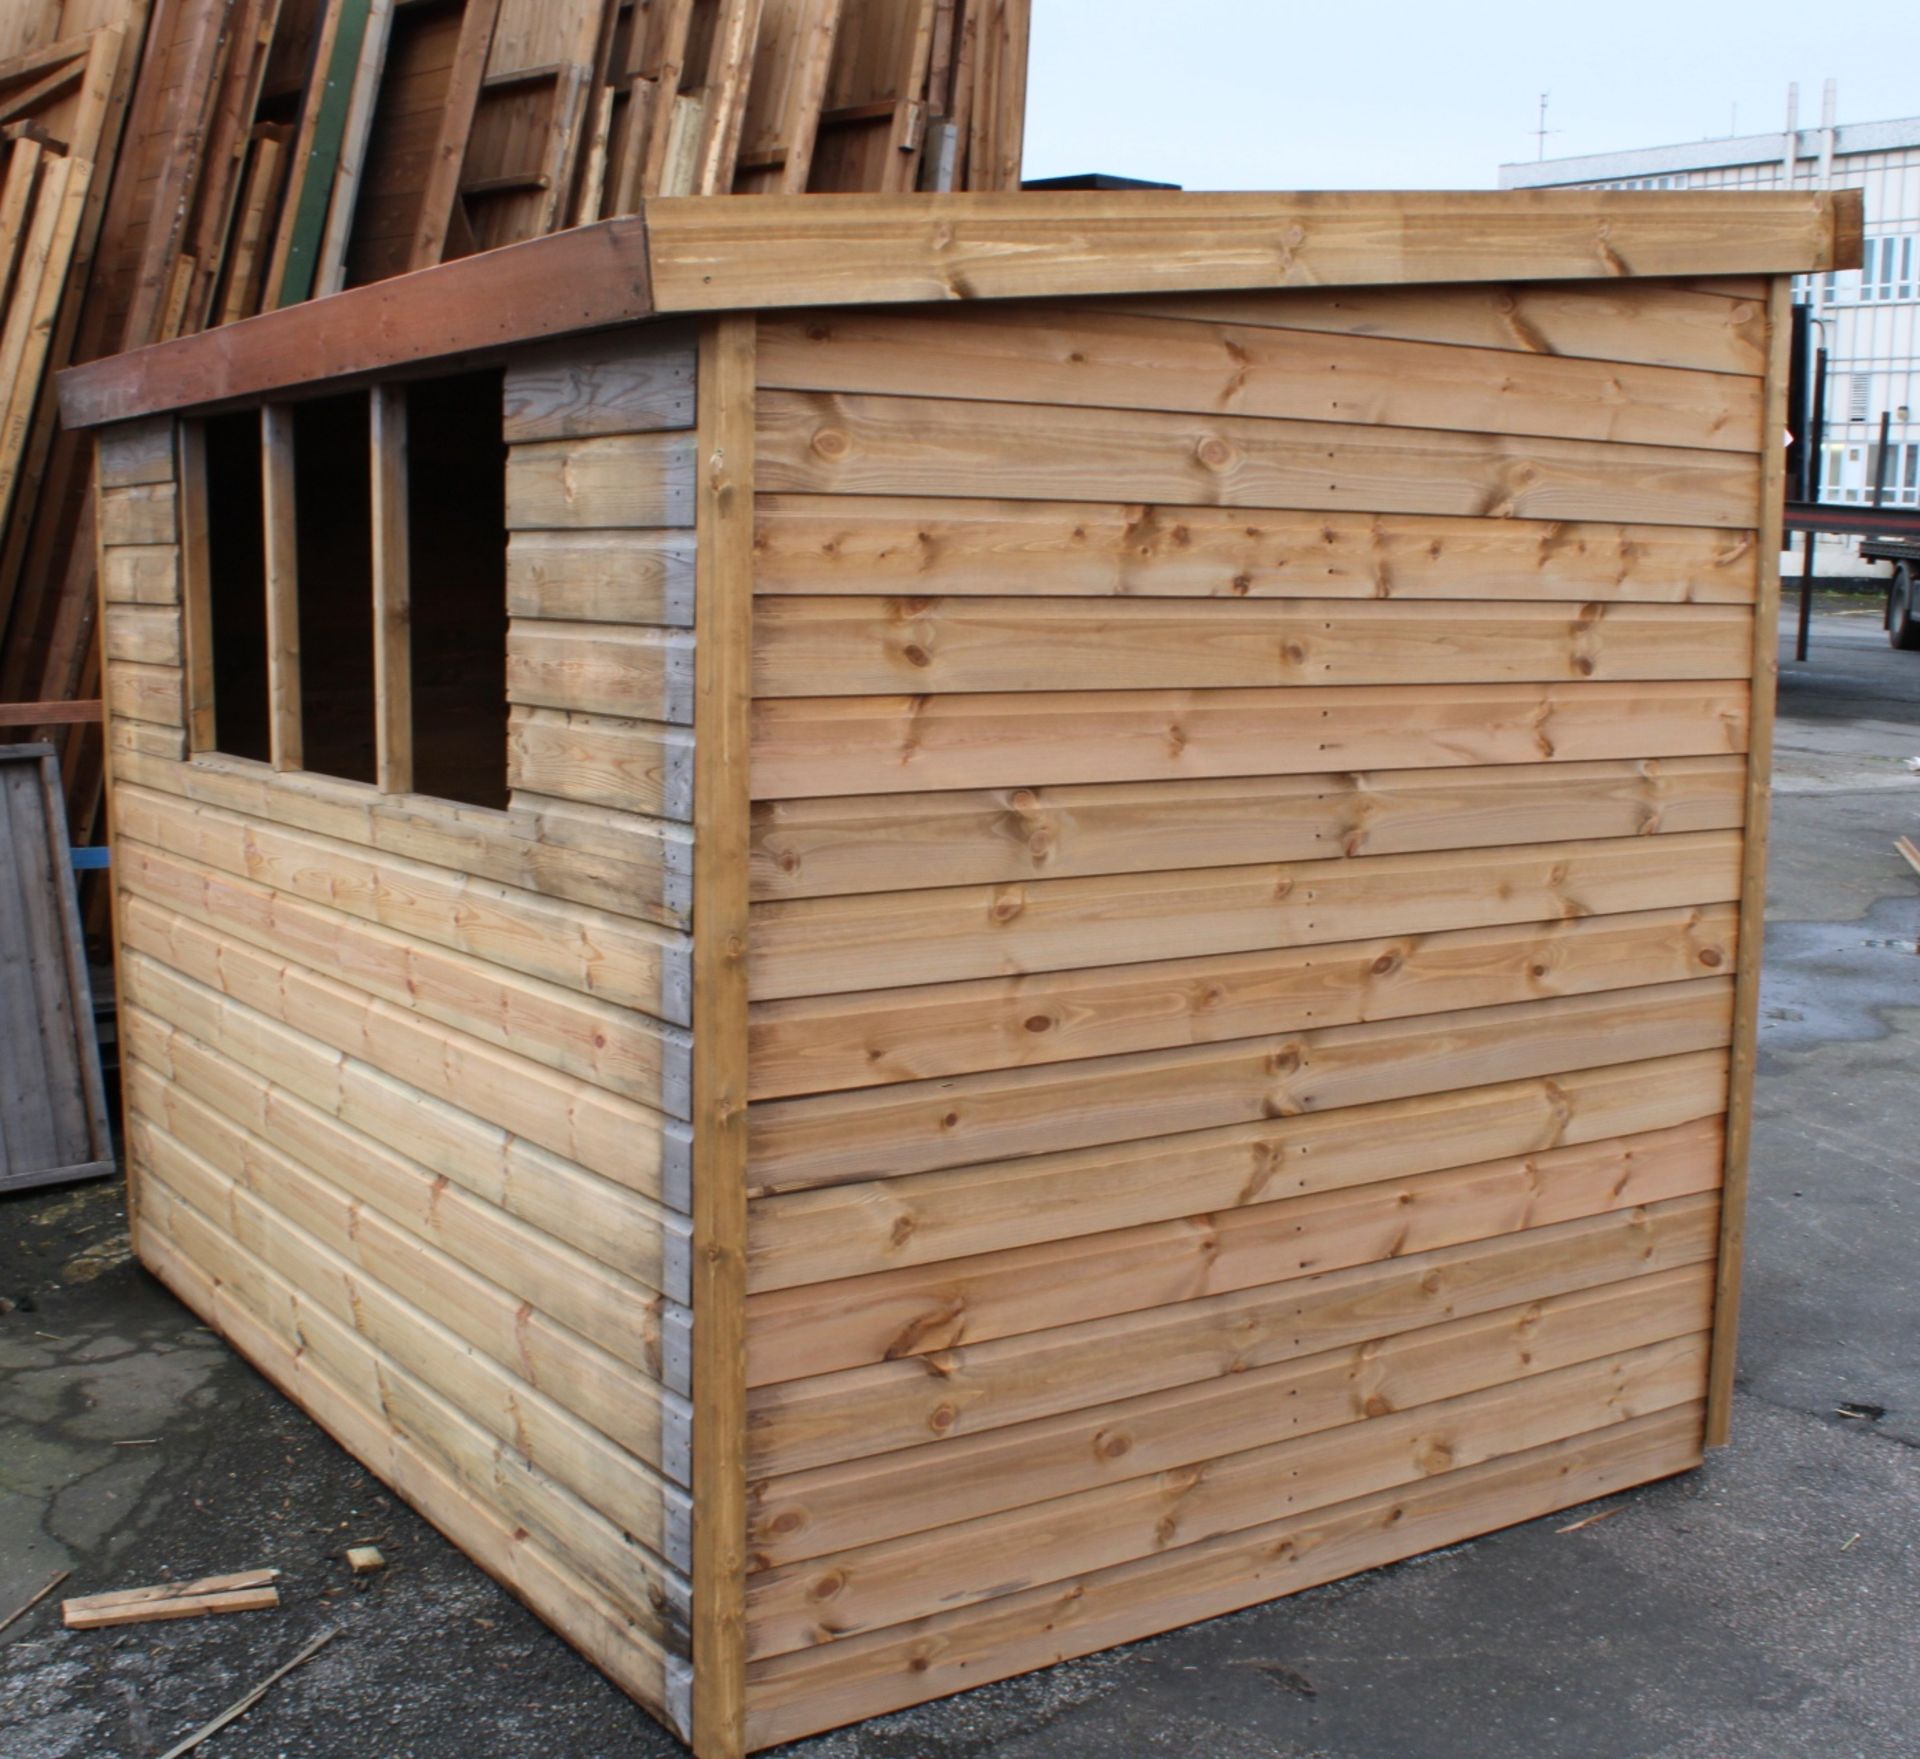 8x6 standard pent shed with extra windows in the rear, Standard 16mm Nominal Cladding - Image 3 of 3